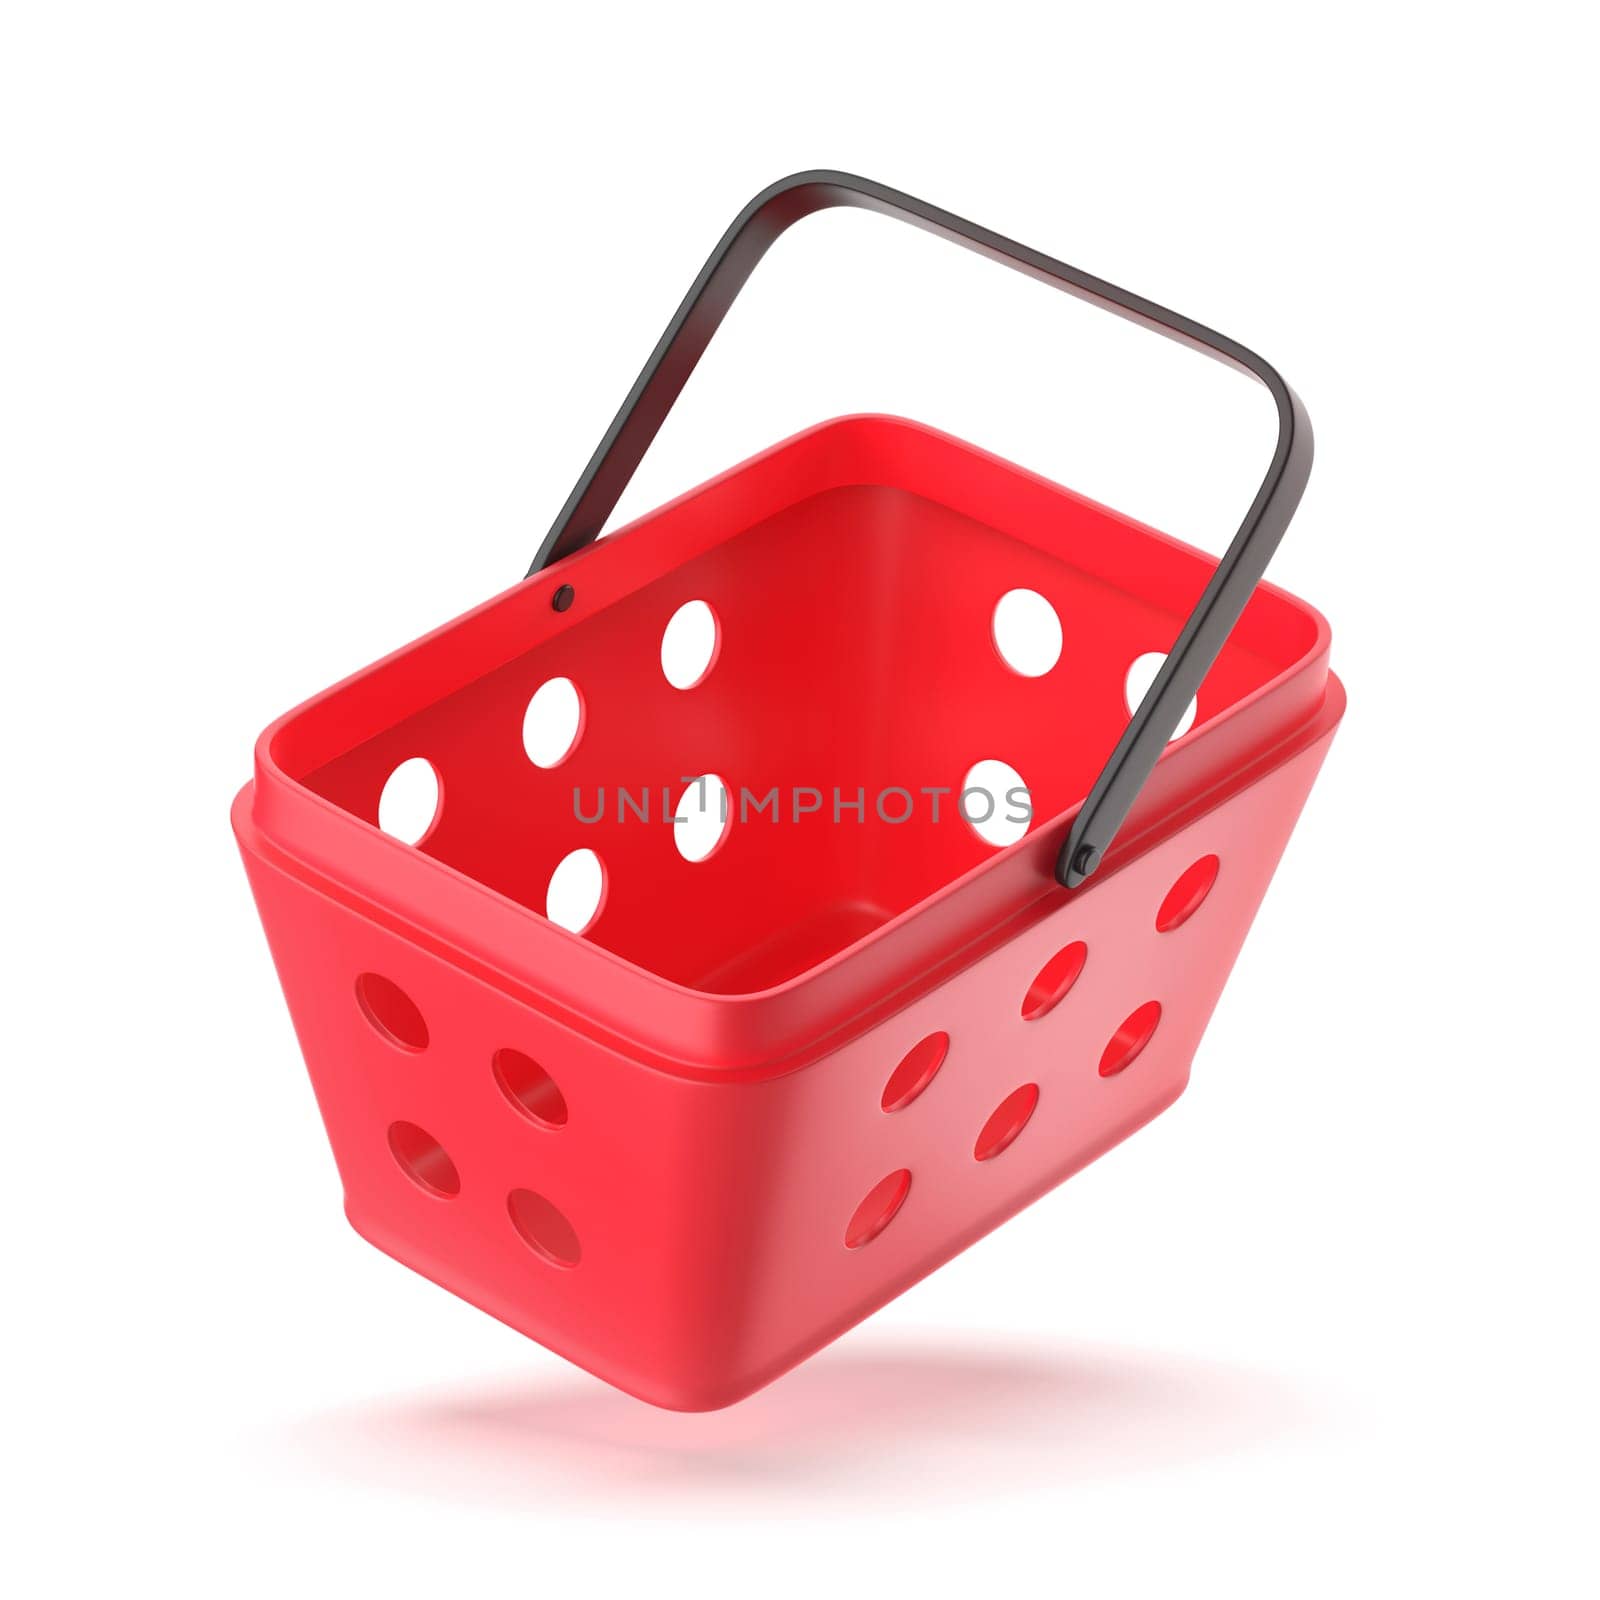 Red plastic shopping basket on white background